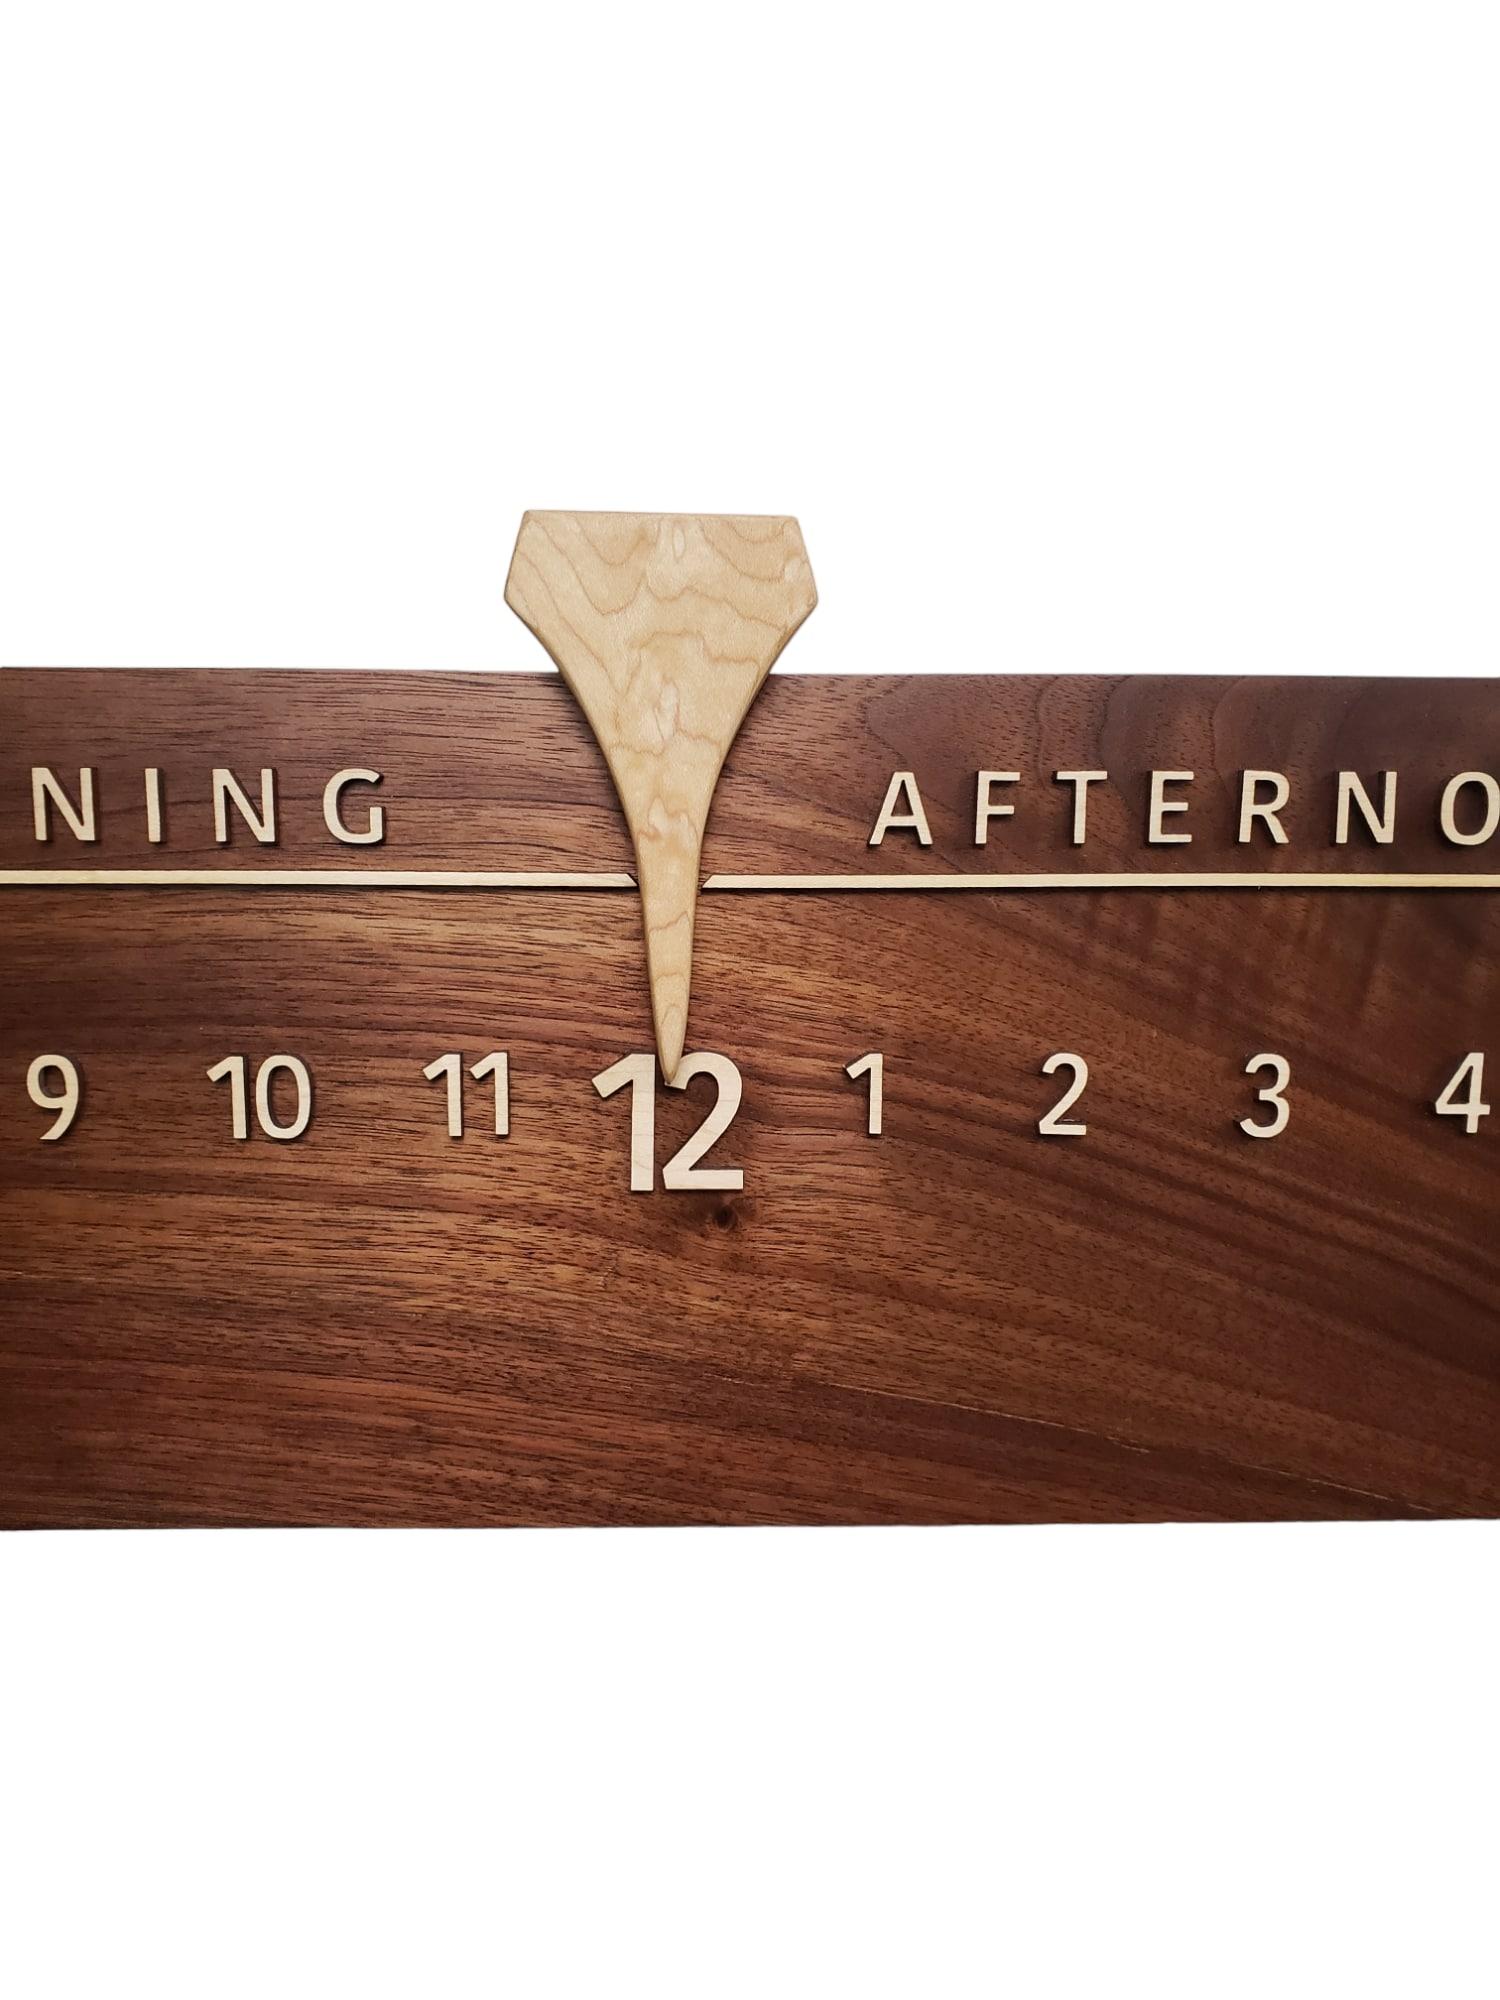 Washington is a Linear Clock featuring an exquisite length of Walnut, with soft purple, golden, and reddish-brown tones that arch in a beautiful rainbow. 

Linear Clocks are an invention of Linear Clockworks; these clocks tell time in a calm,